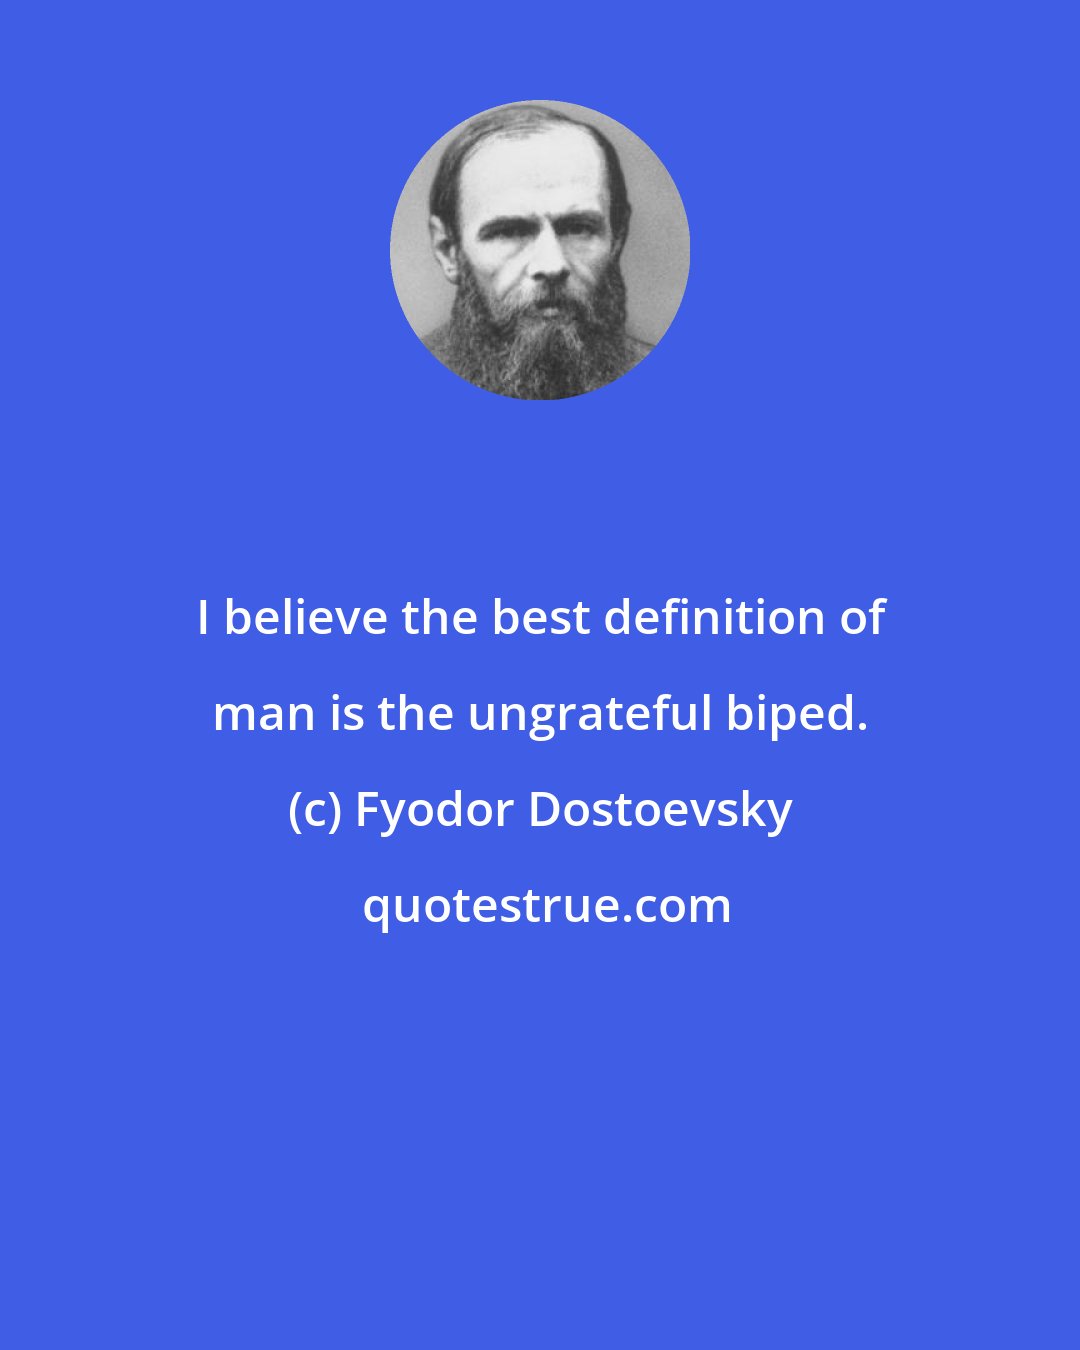 Fyodor Dostoevsky: I believe the best definition of man is the ungrateful biped.